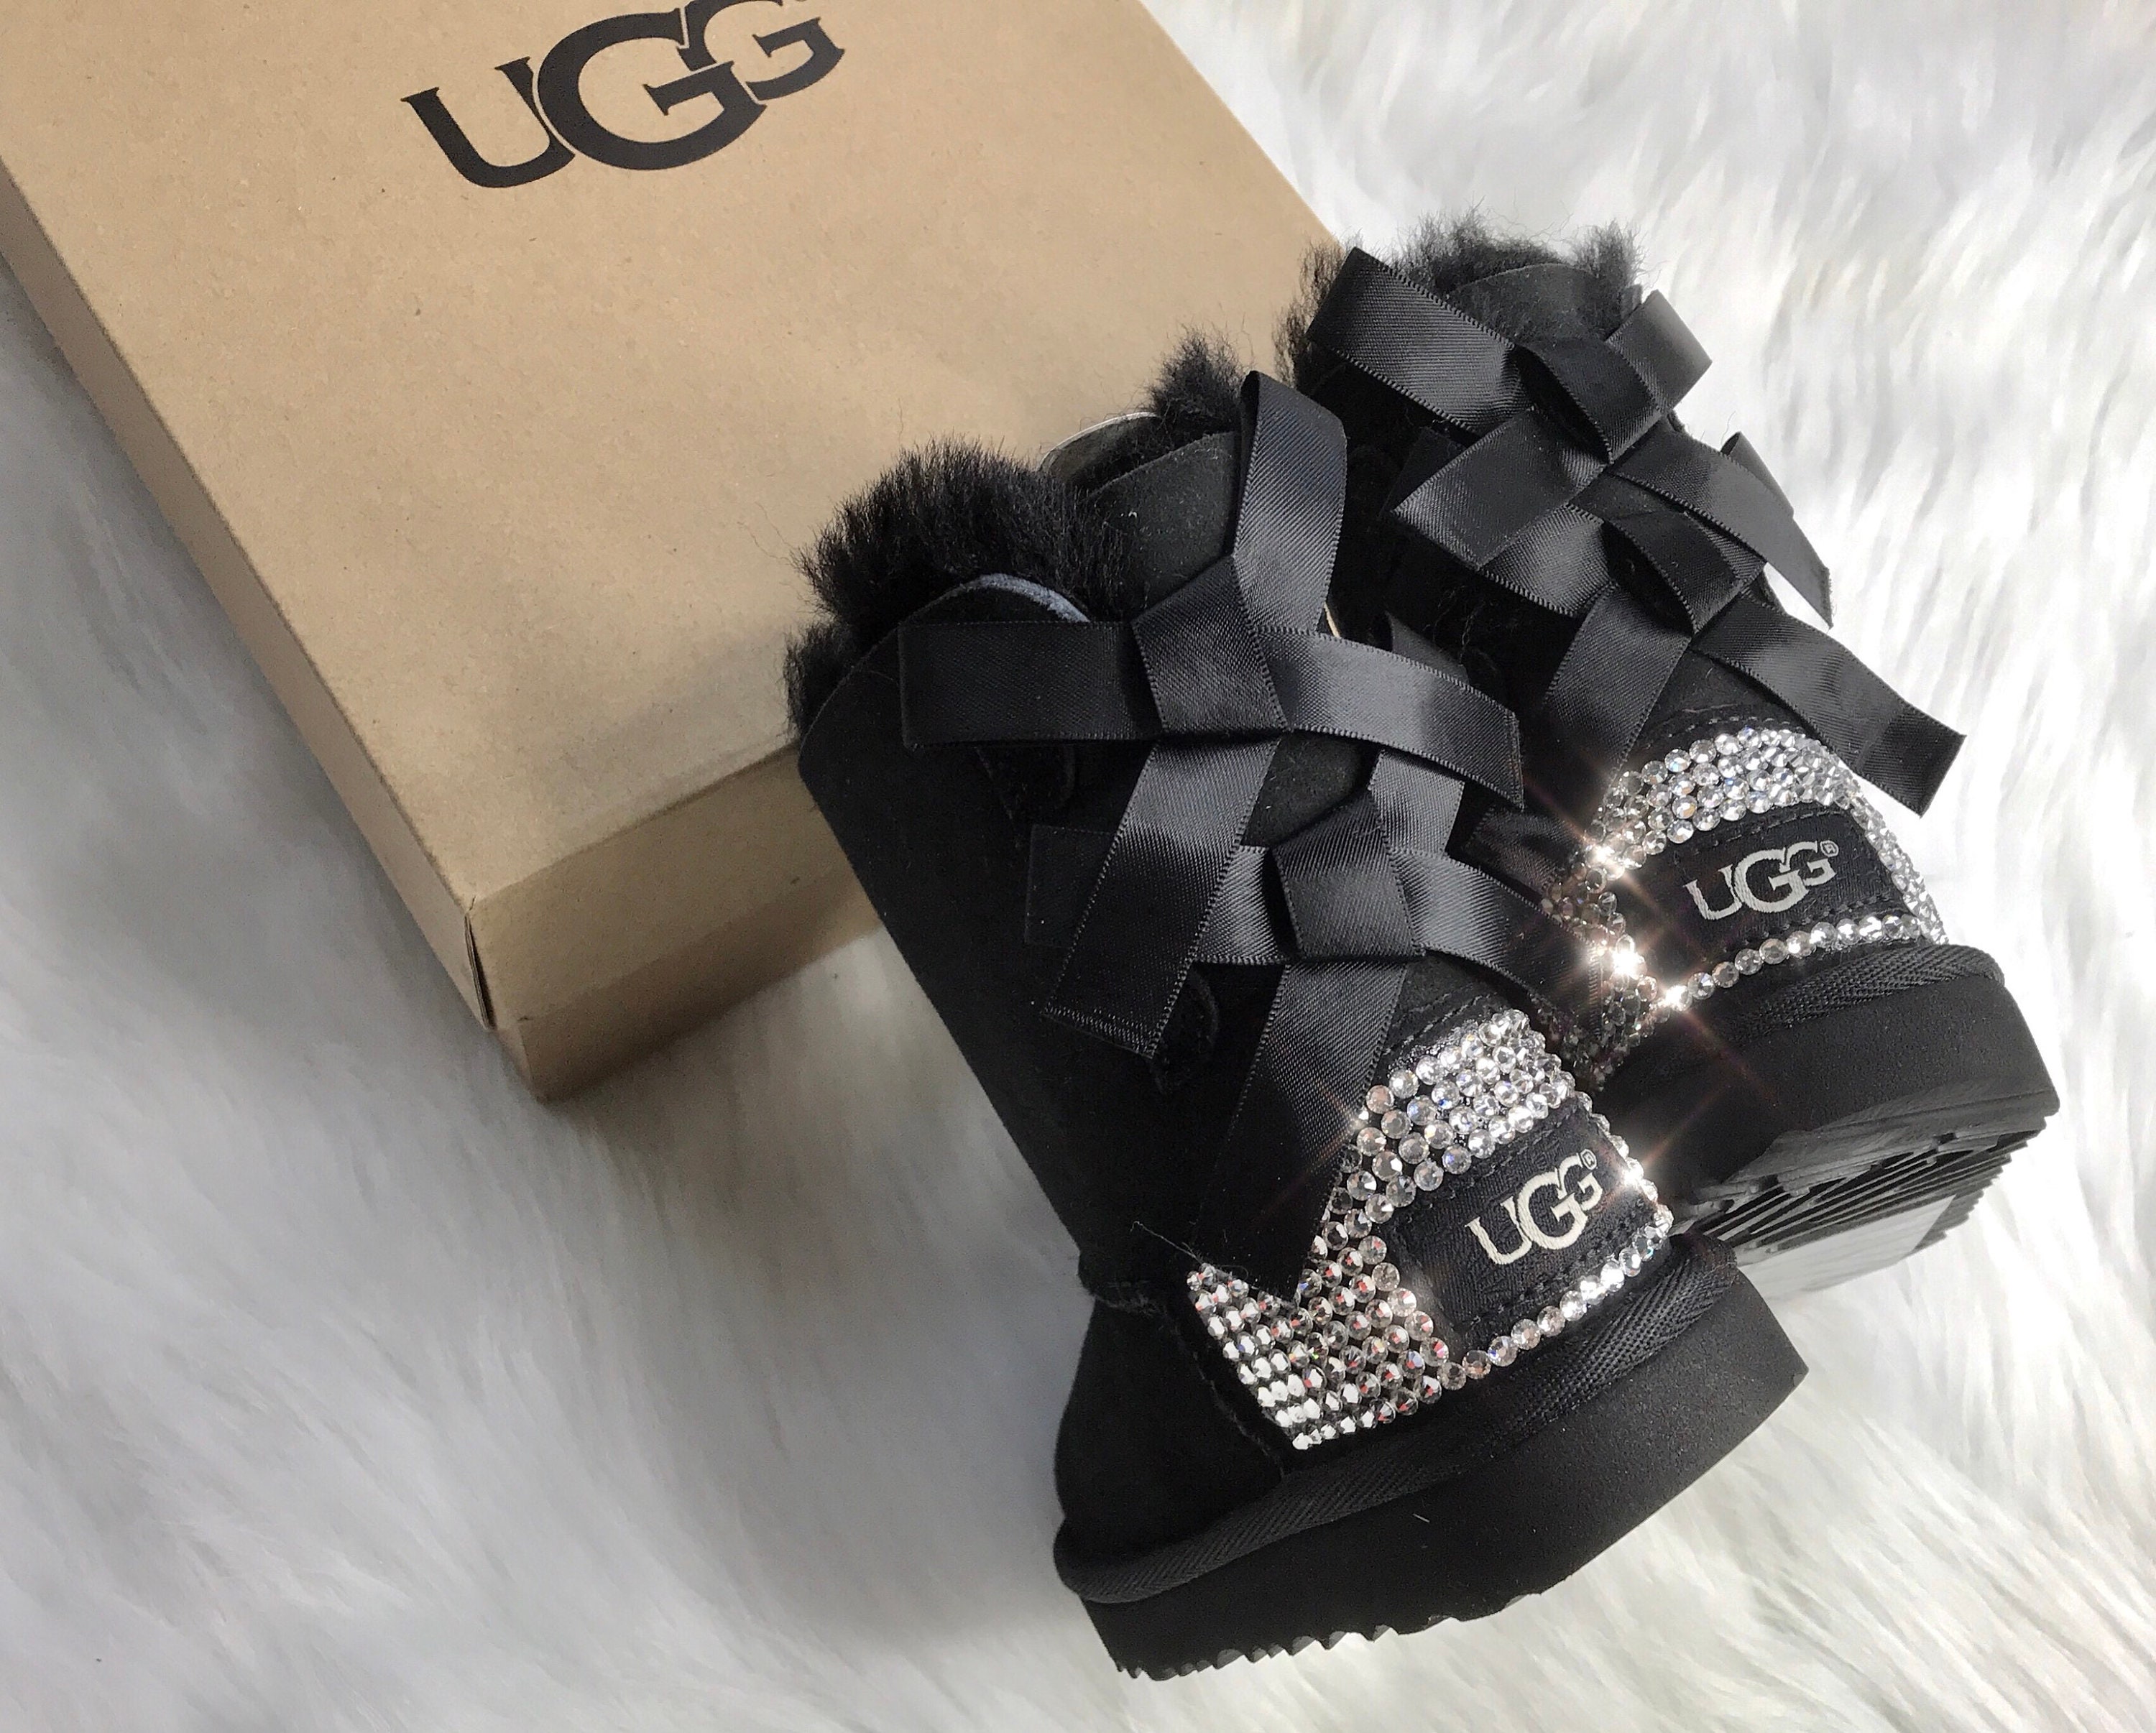 Pin by Megan on style  Boots, Ugg boots, Louis vuitton